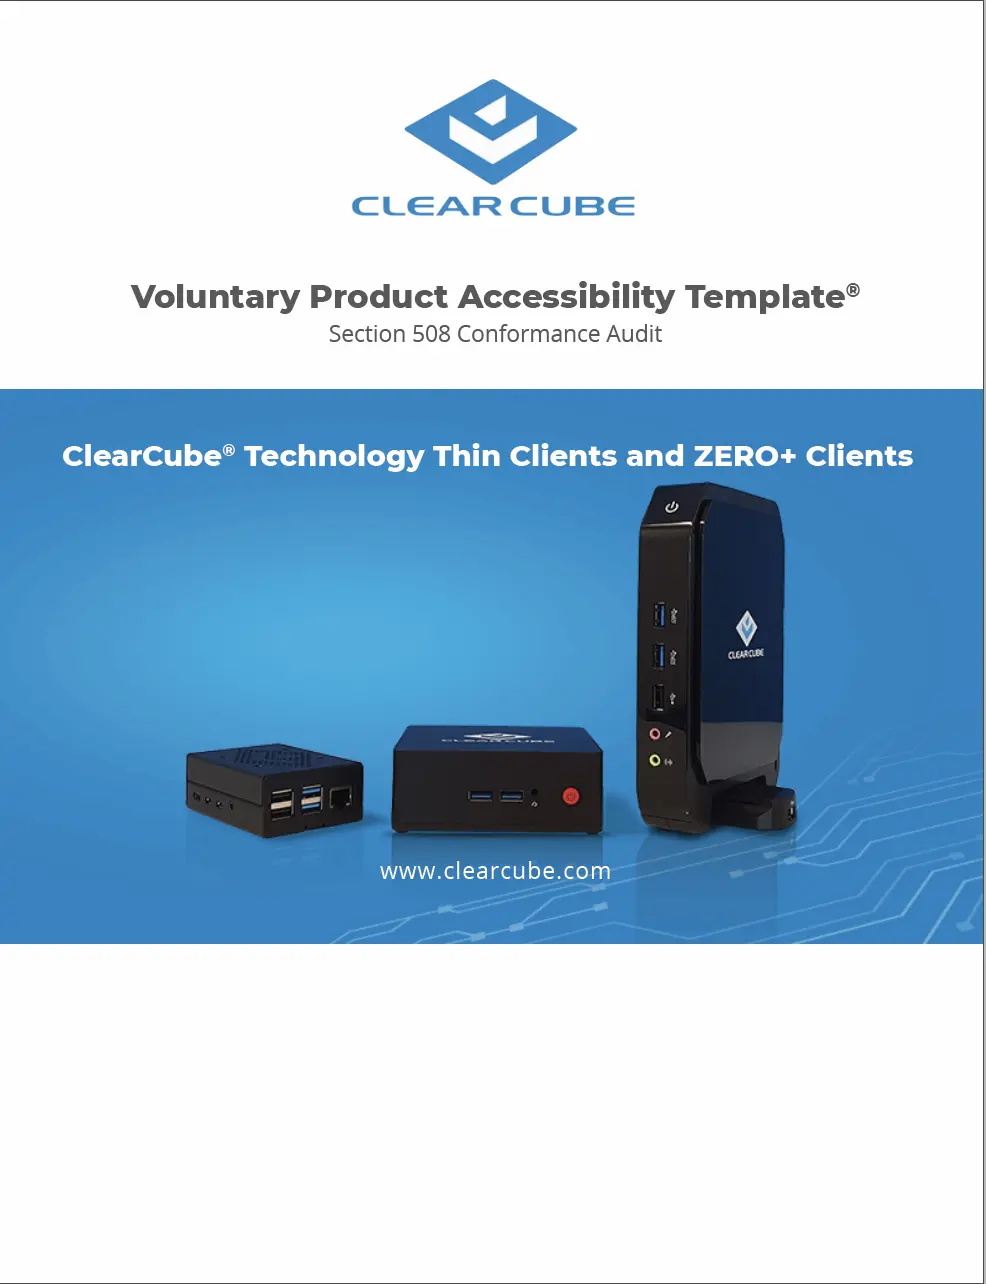 This Voluntary Product Accessibility Template (VPAT) provides guidance on the accessibility characteristics of ClearCube ThinClients and ZERO+ Clients.